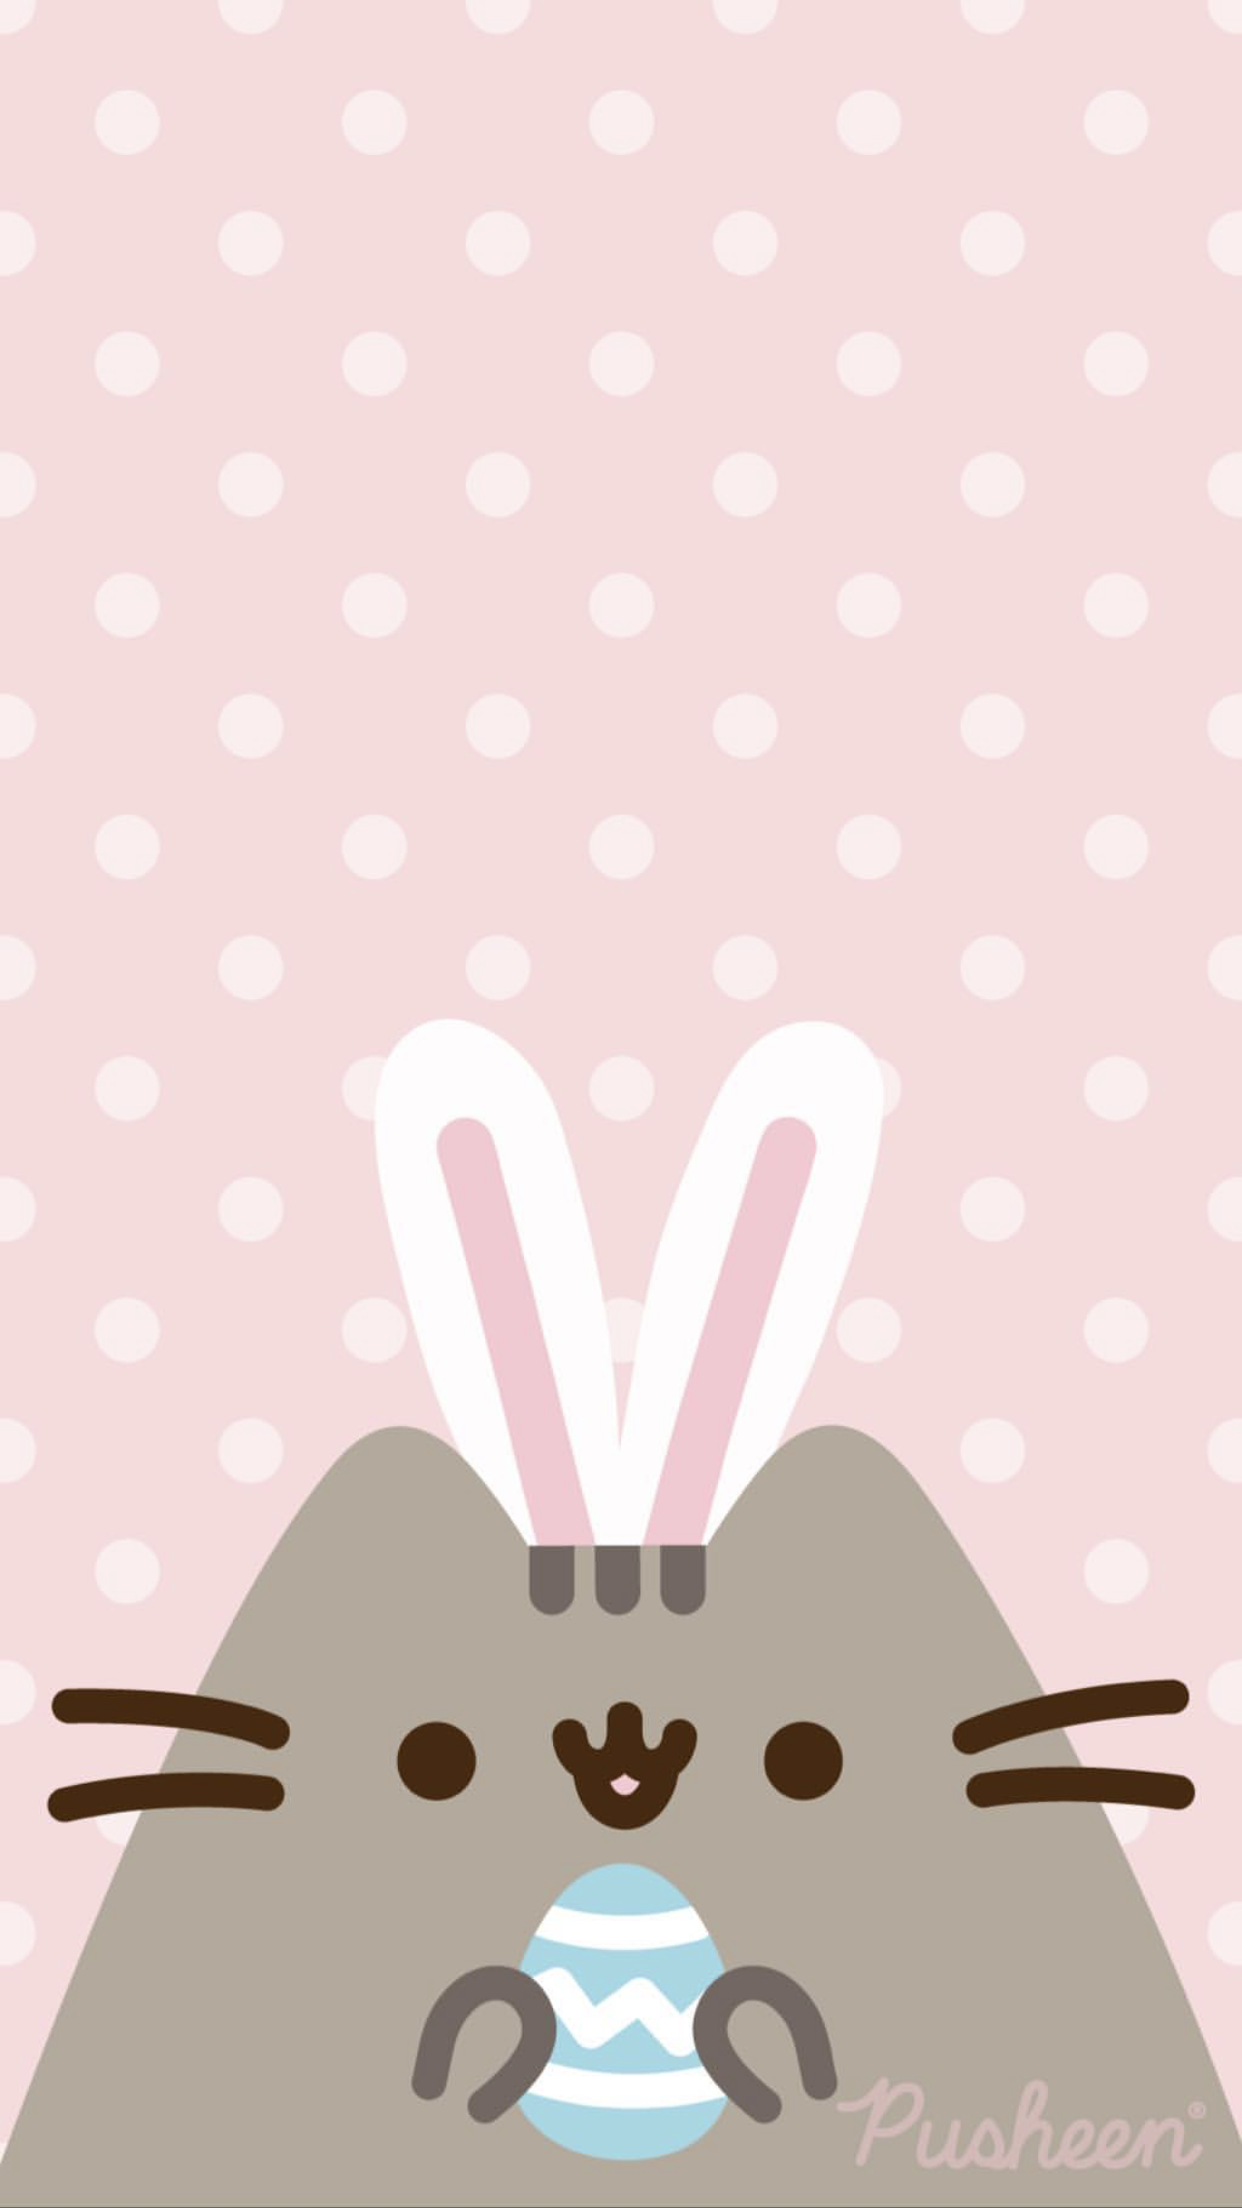 Pusheen the cat floral pastels spring iphone wallpaper Easter